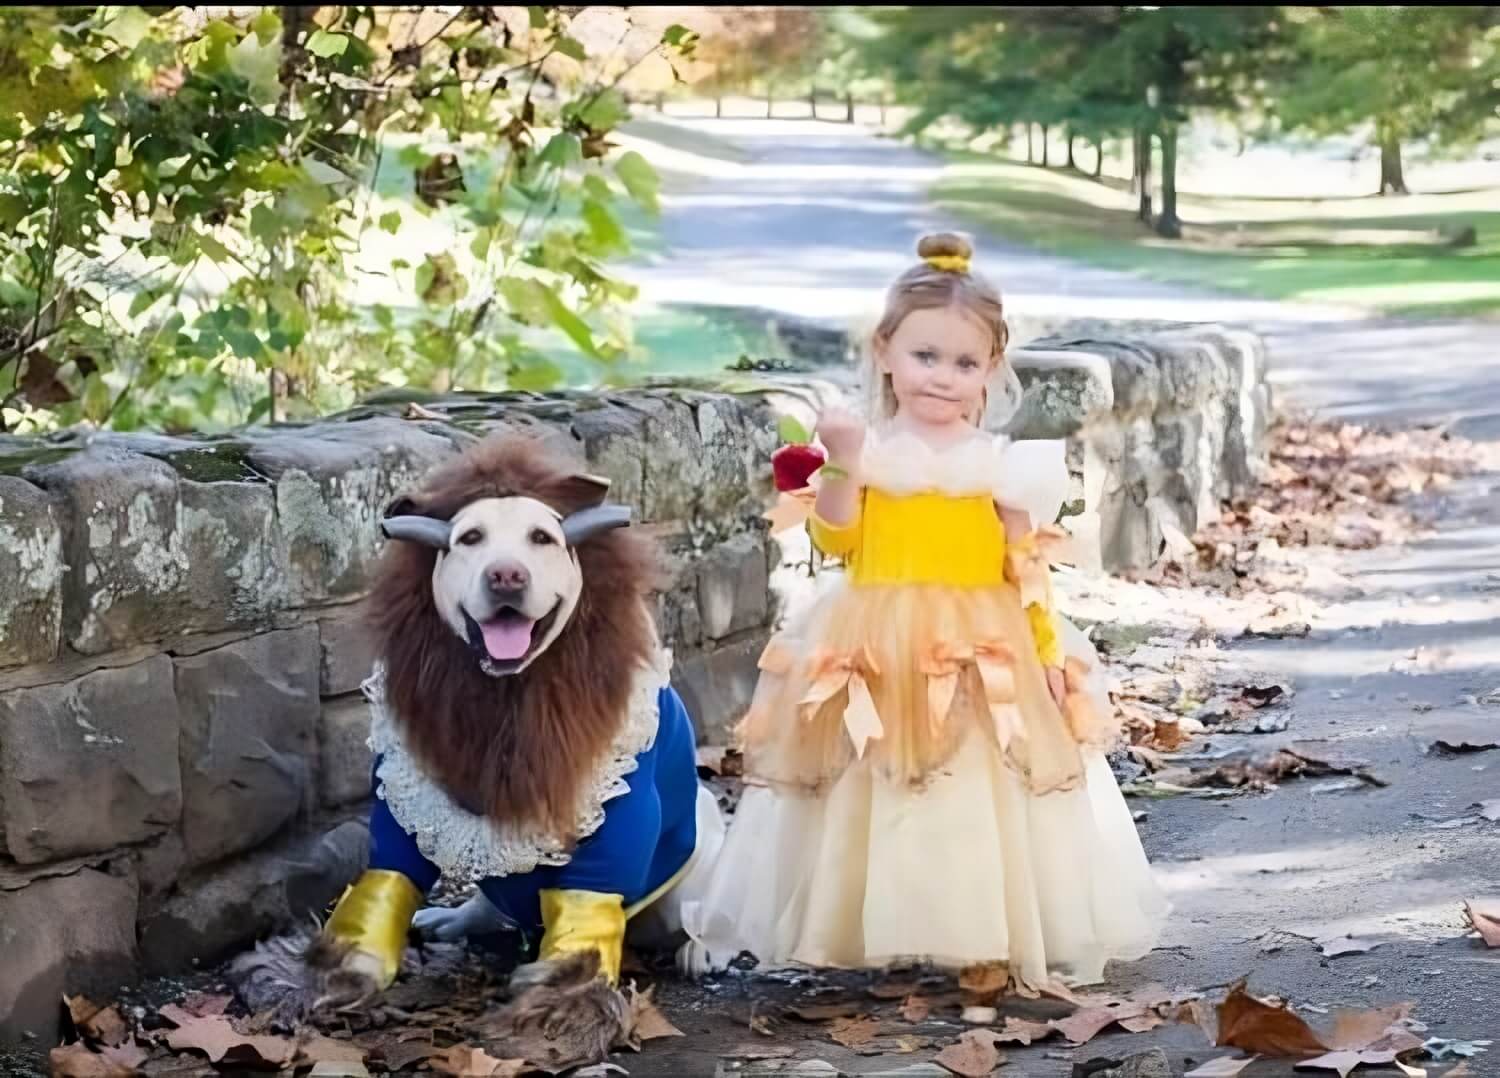 Dog and Owner Halloween Costumes